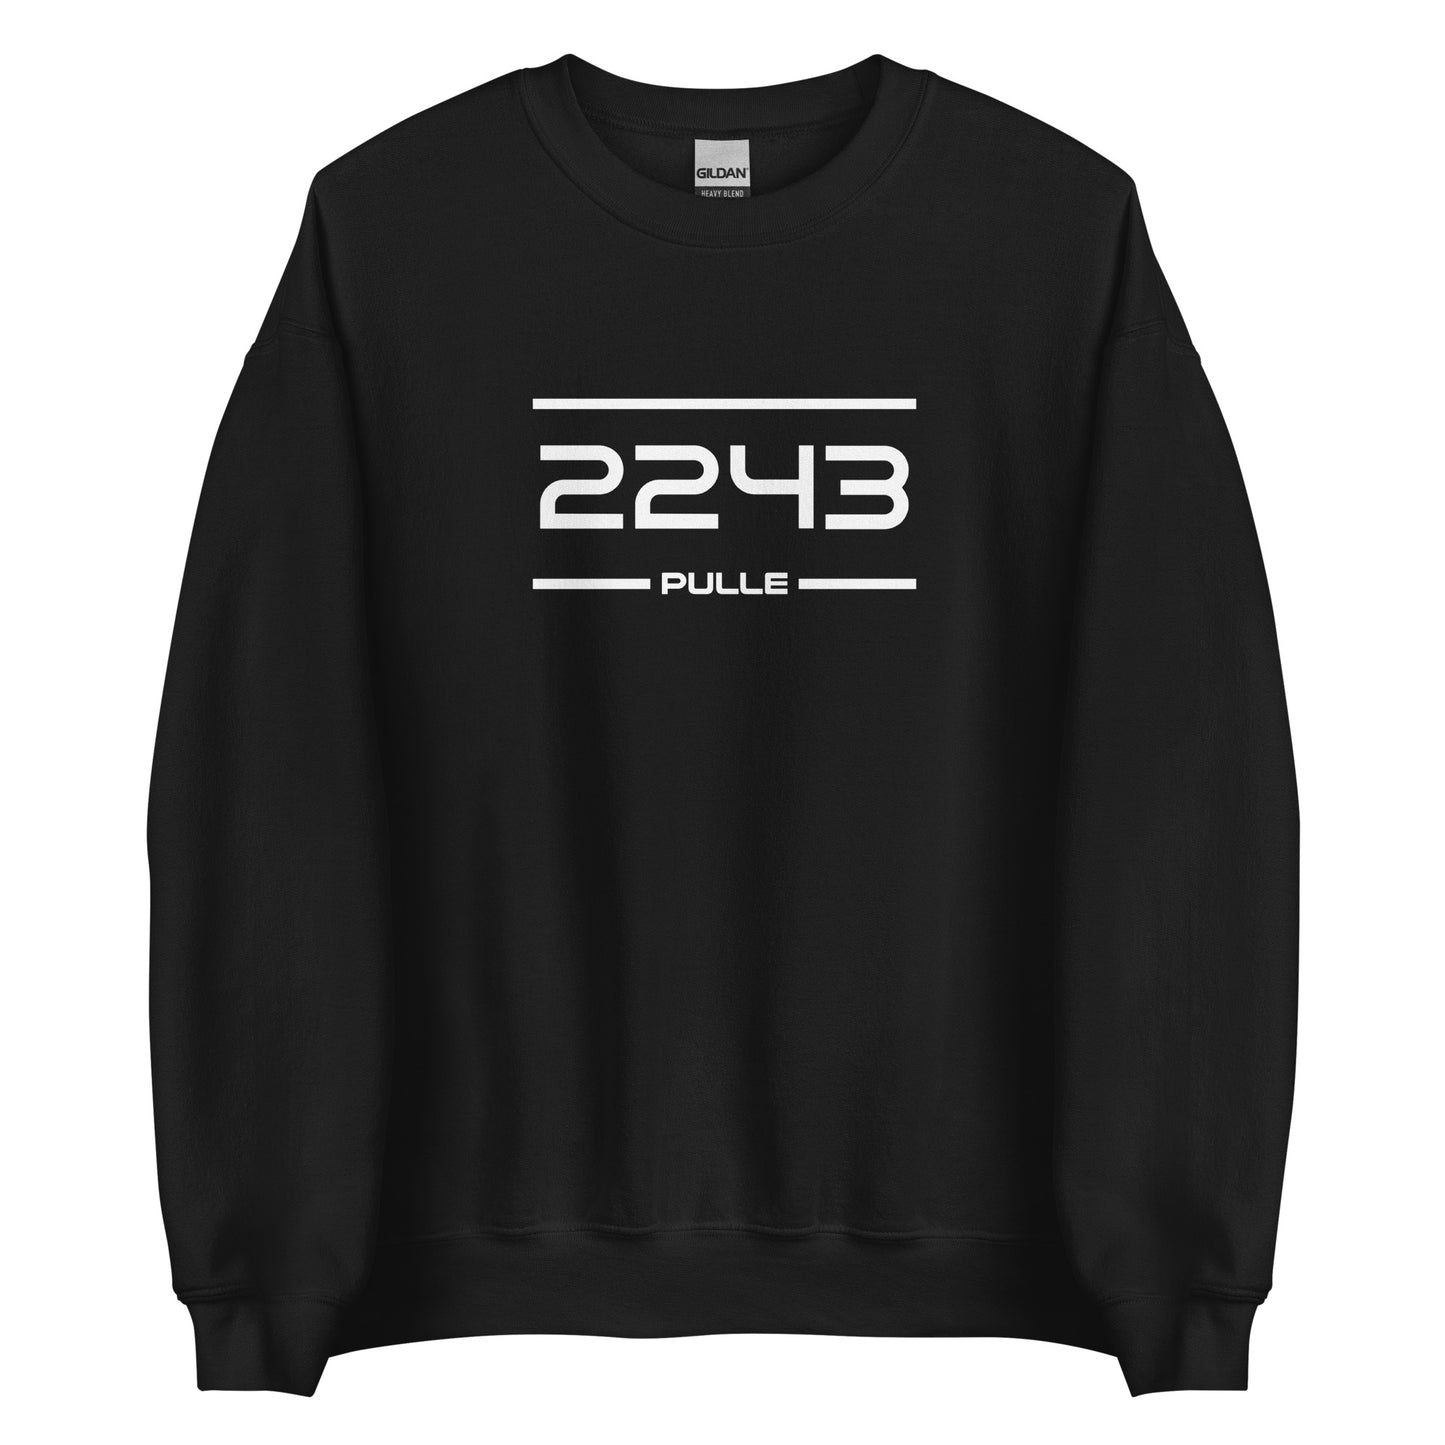 Sweater - 2243 - Pulle (M/V)